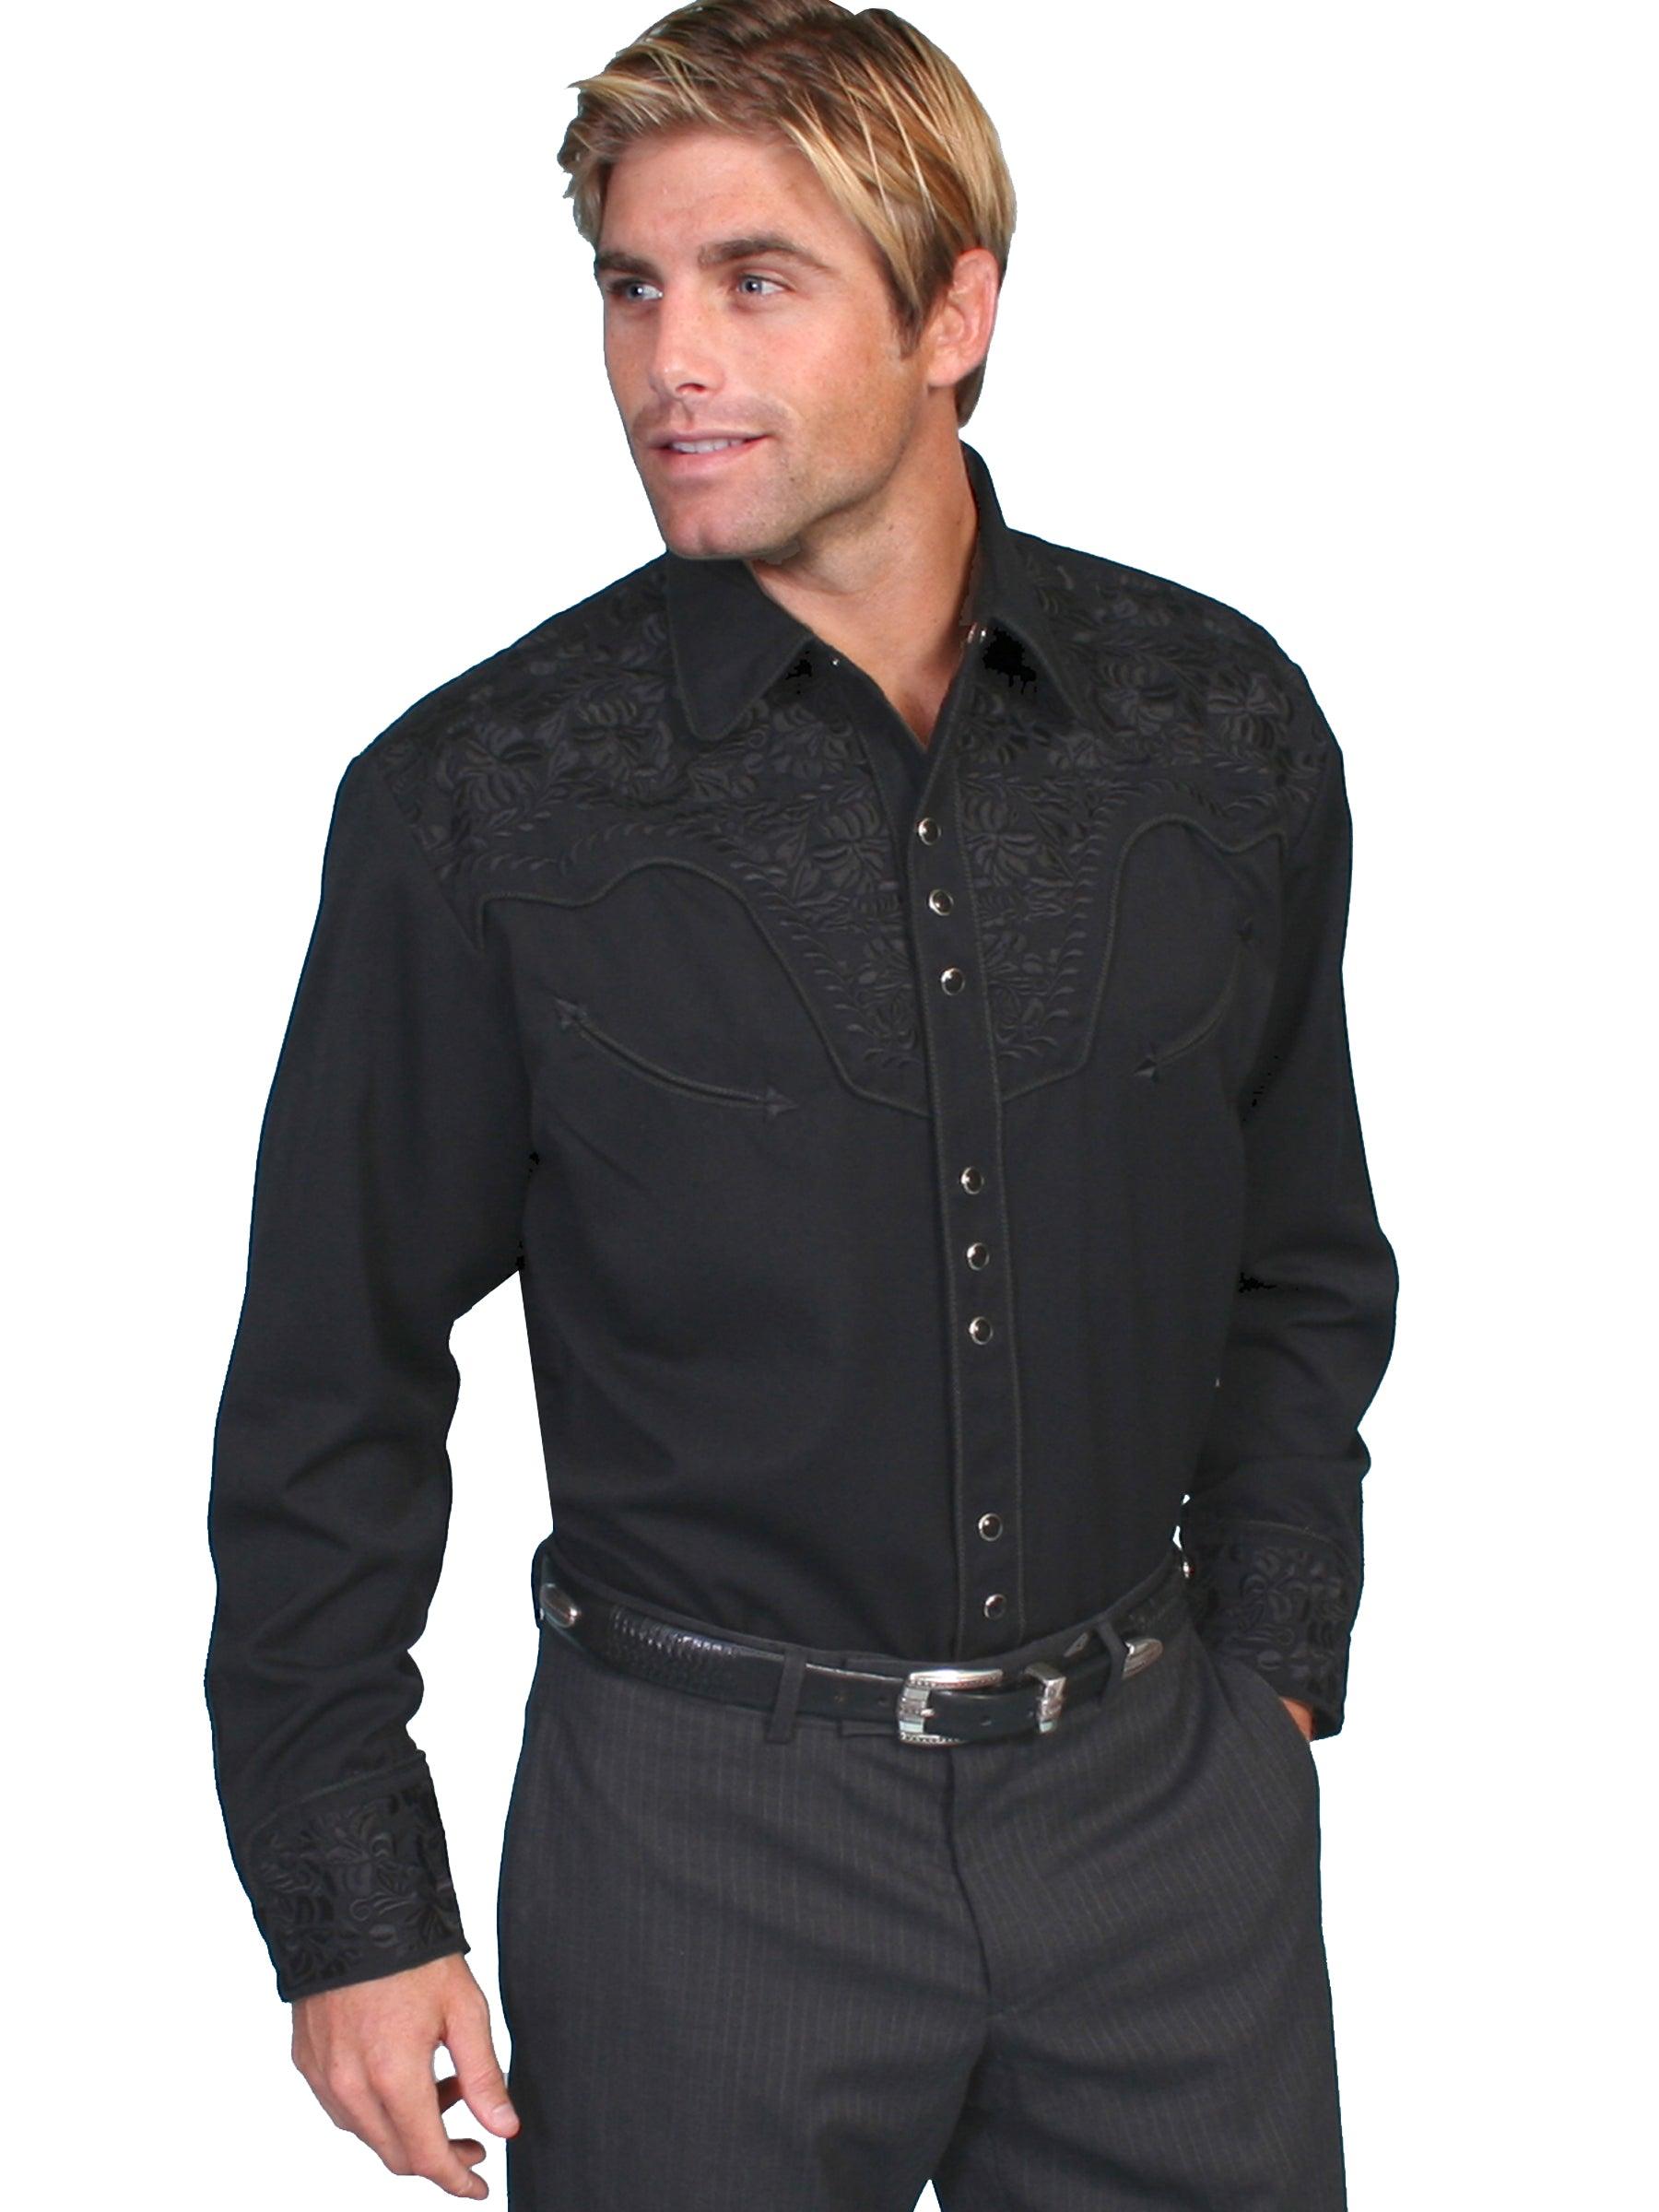 Scully JET BLACK FLORAL TOOLED EMBROIDERY SHIRT - Flyclothing LLC